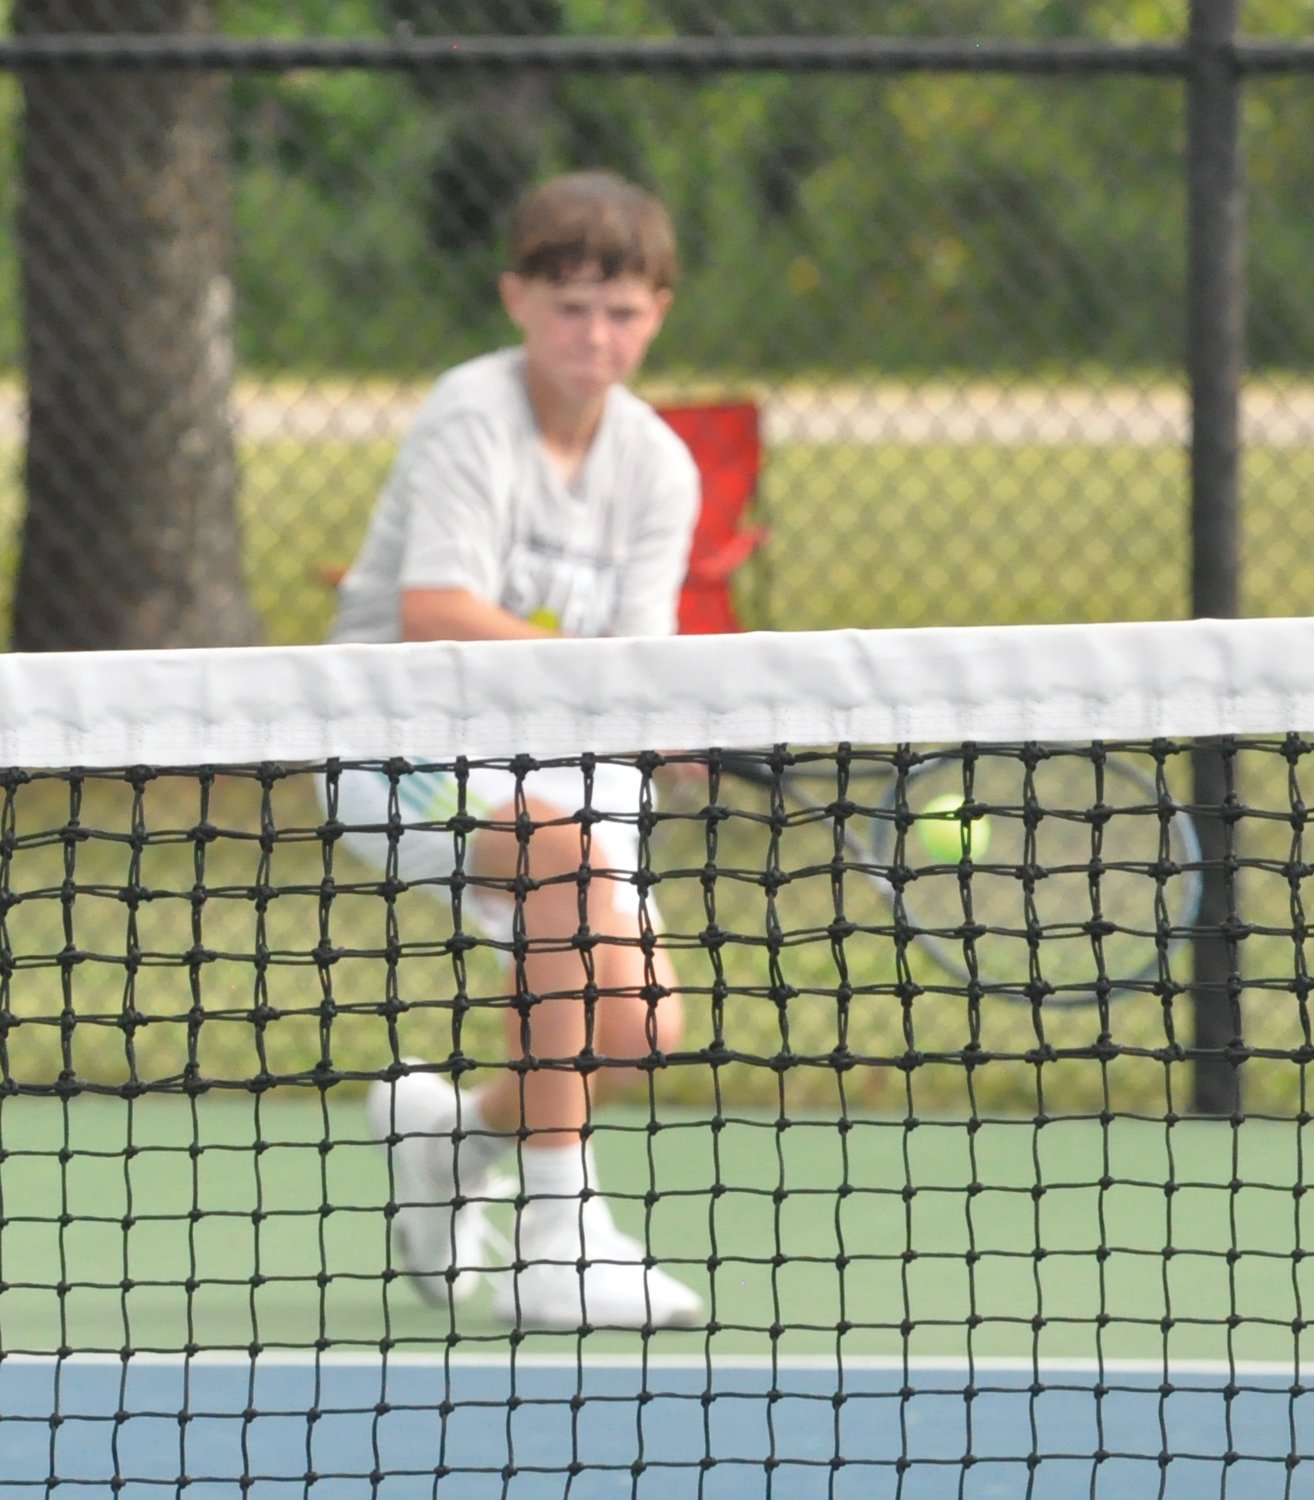 Fountain Central freshman Skyler Hoagland picked up a key win for the Mustangs at No. 1 singles against Crawfordsville's James Murphy.